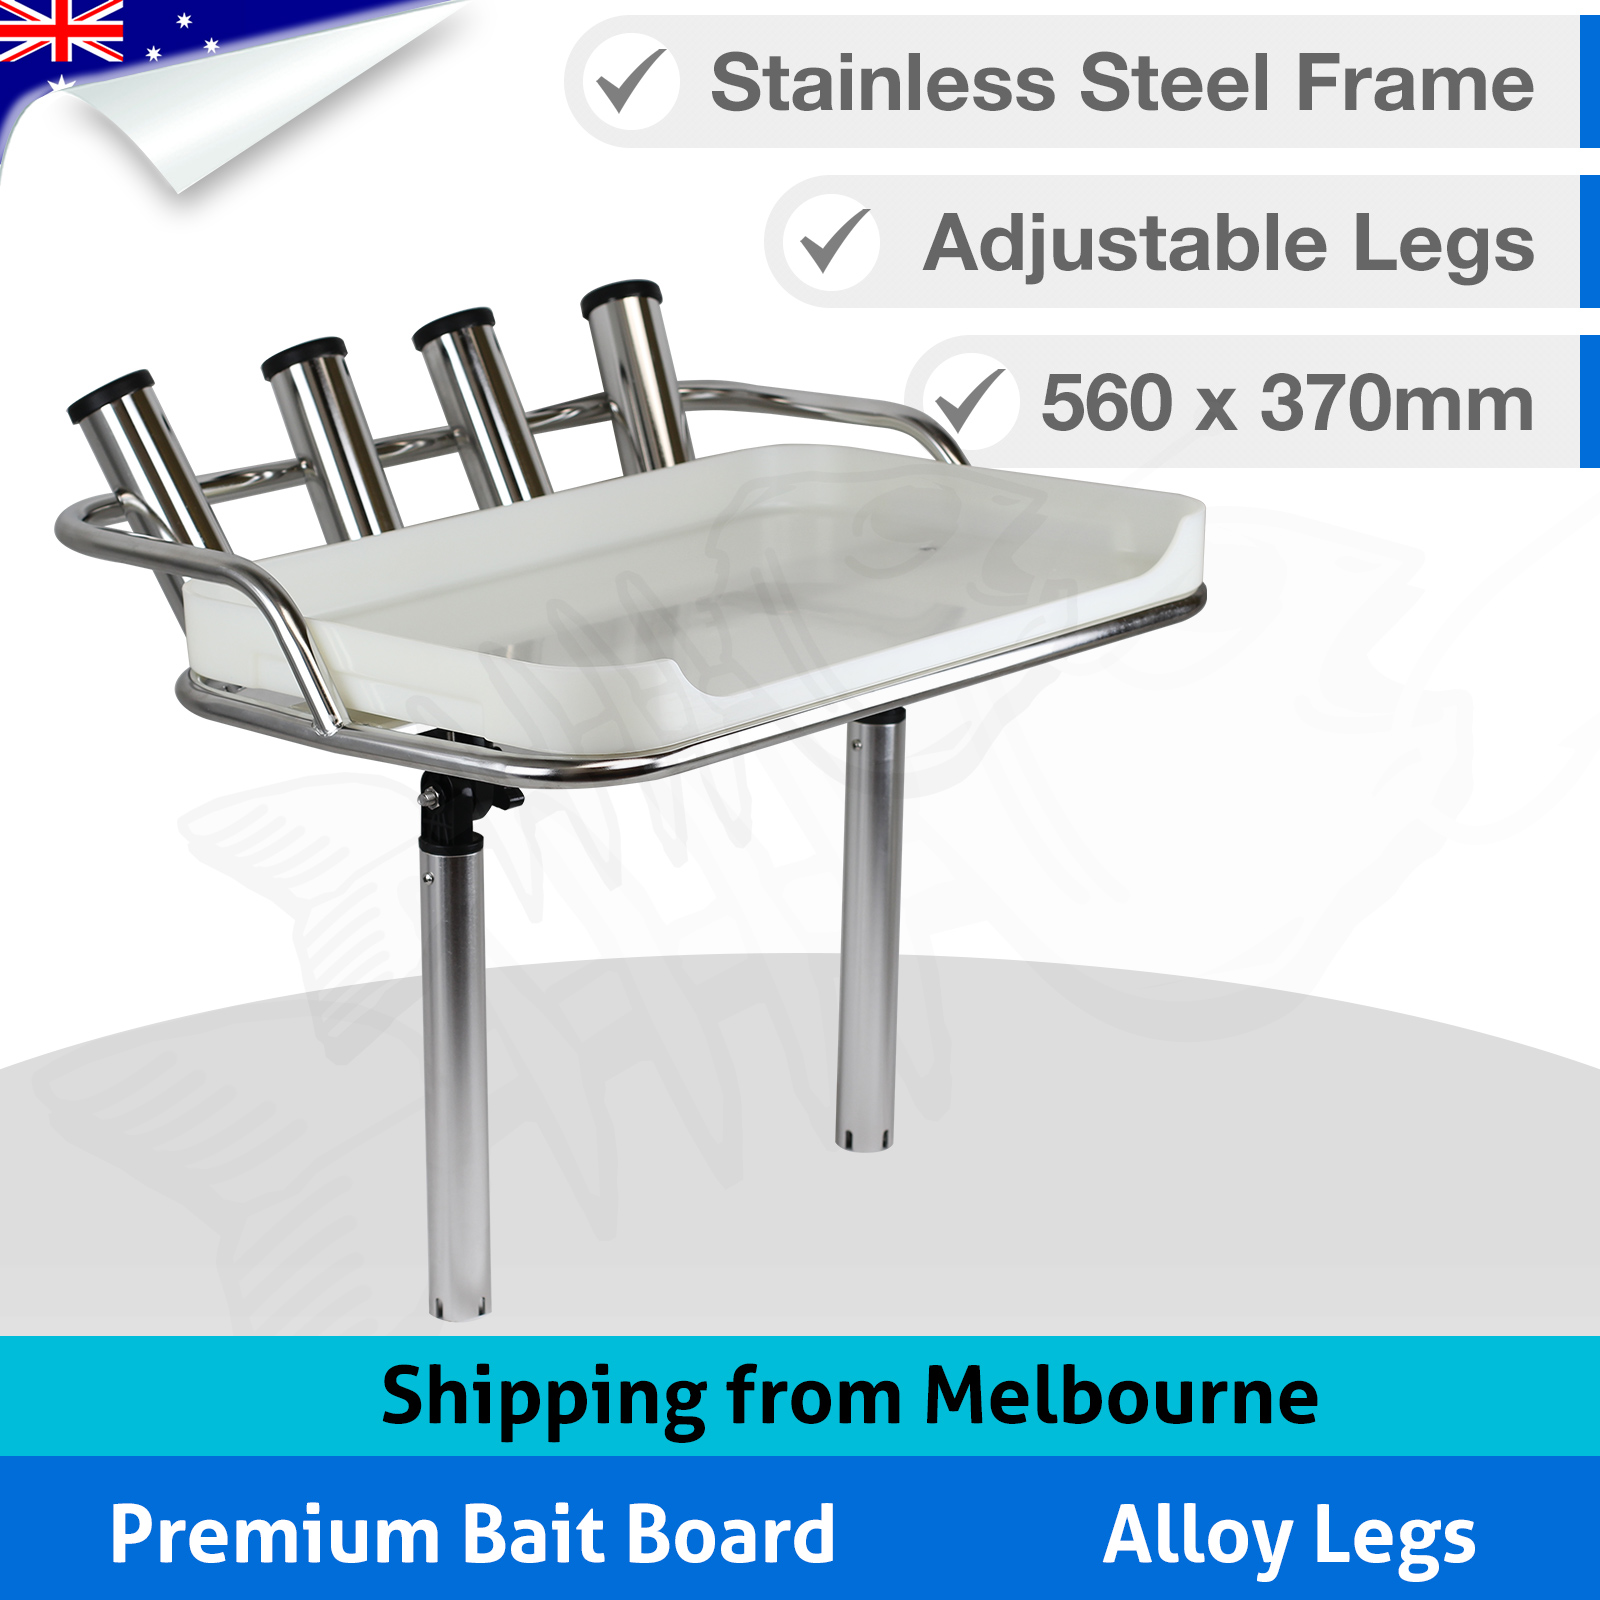 Premium BAIT BOARD Fishing Boat Cutting Fish - 4 Stainless Steel Rod Holders